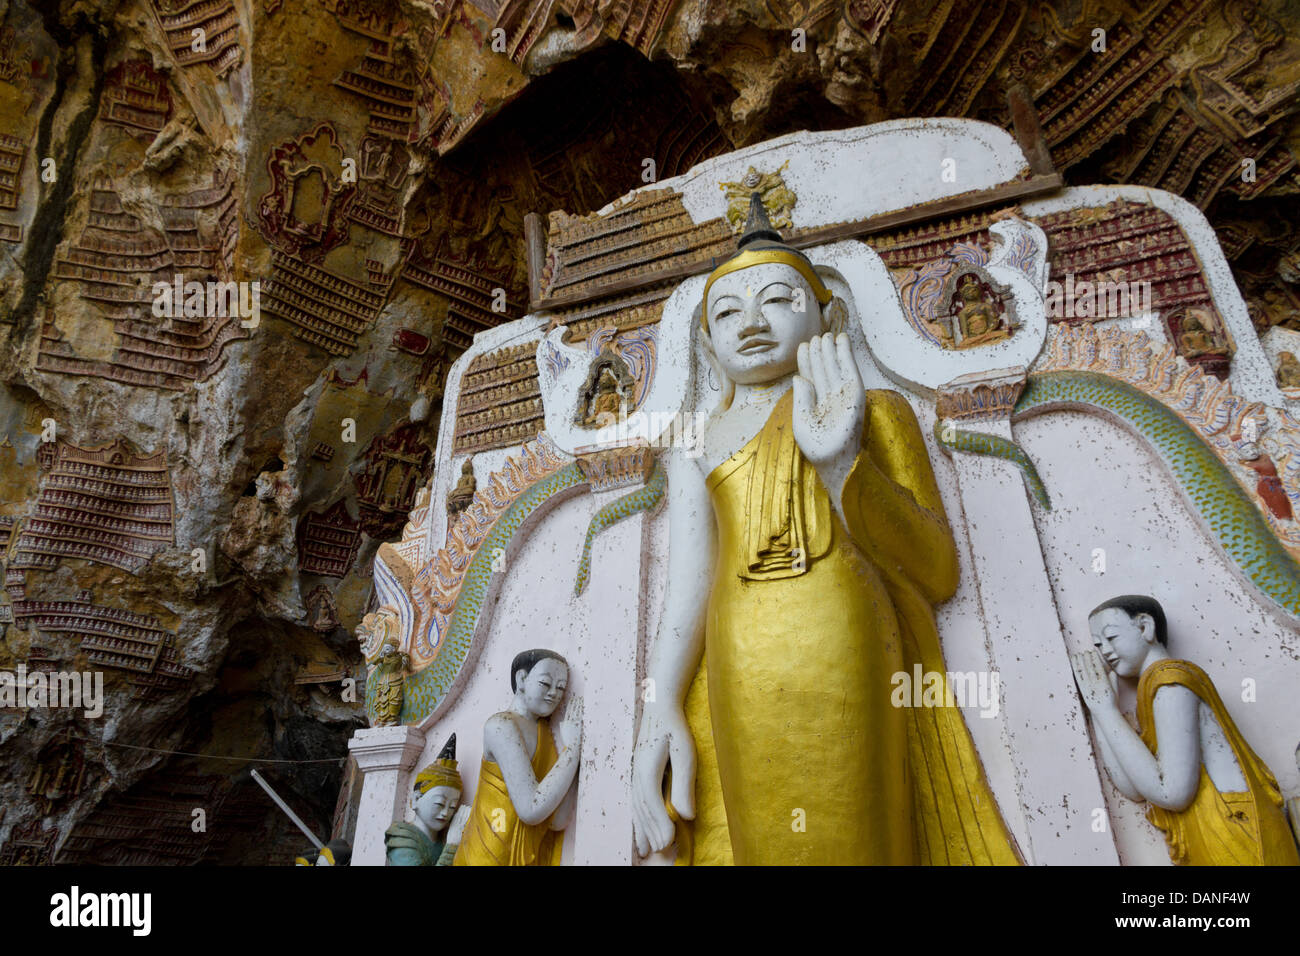 interior of Kawgun buddhist cave decorates with buddhas, carvings and stupas, Hpa An, Burma Stock Photo